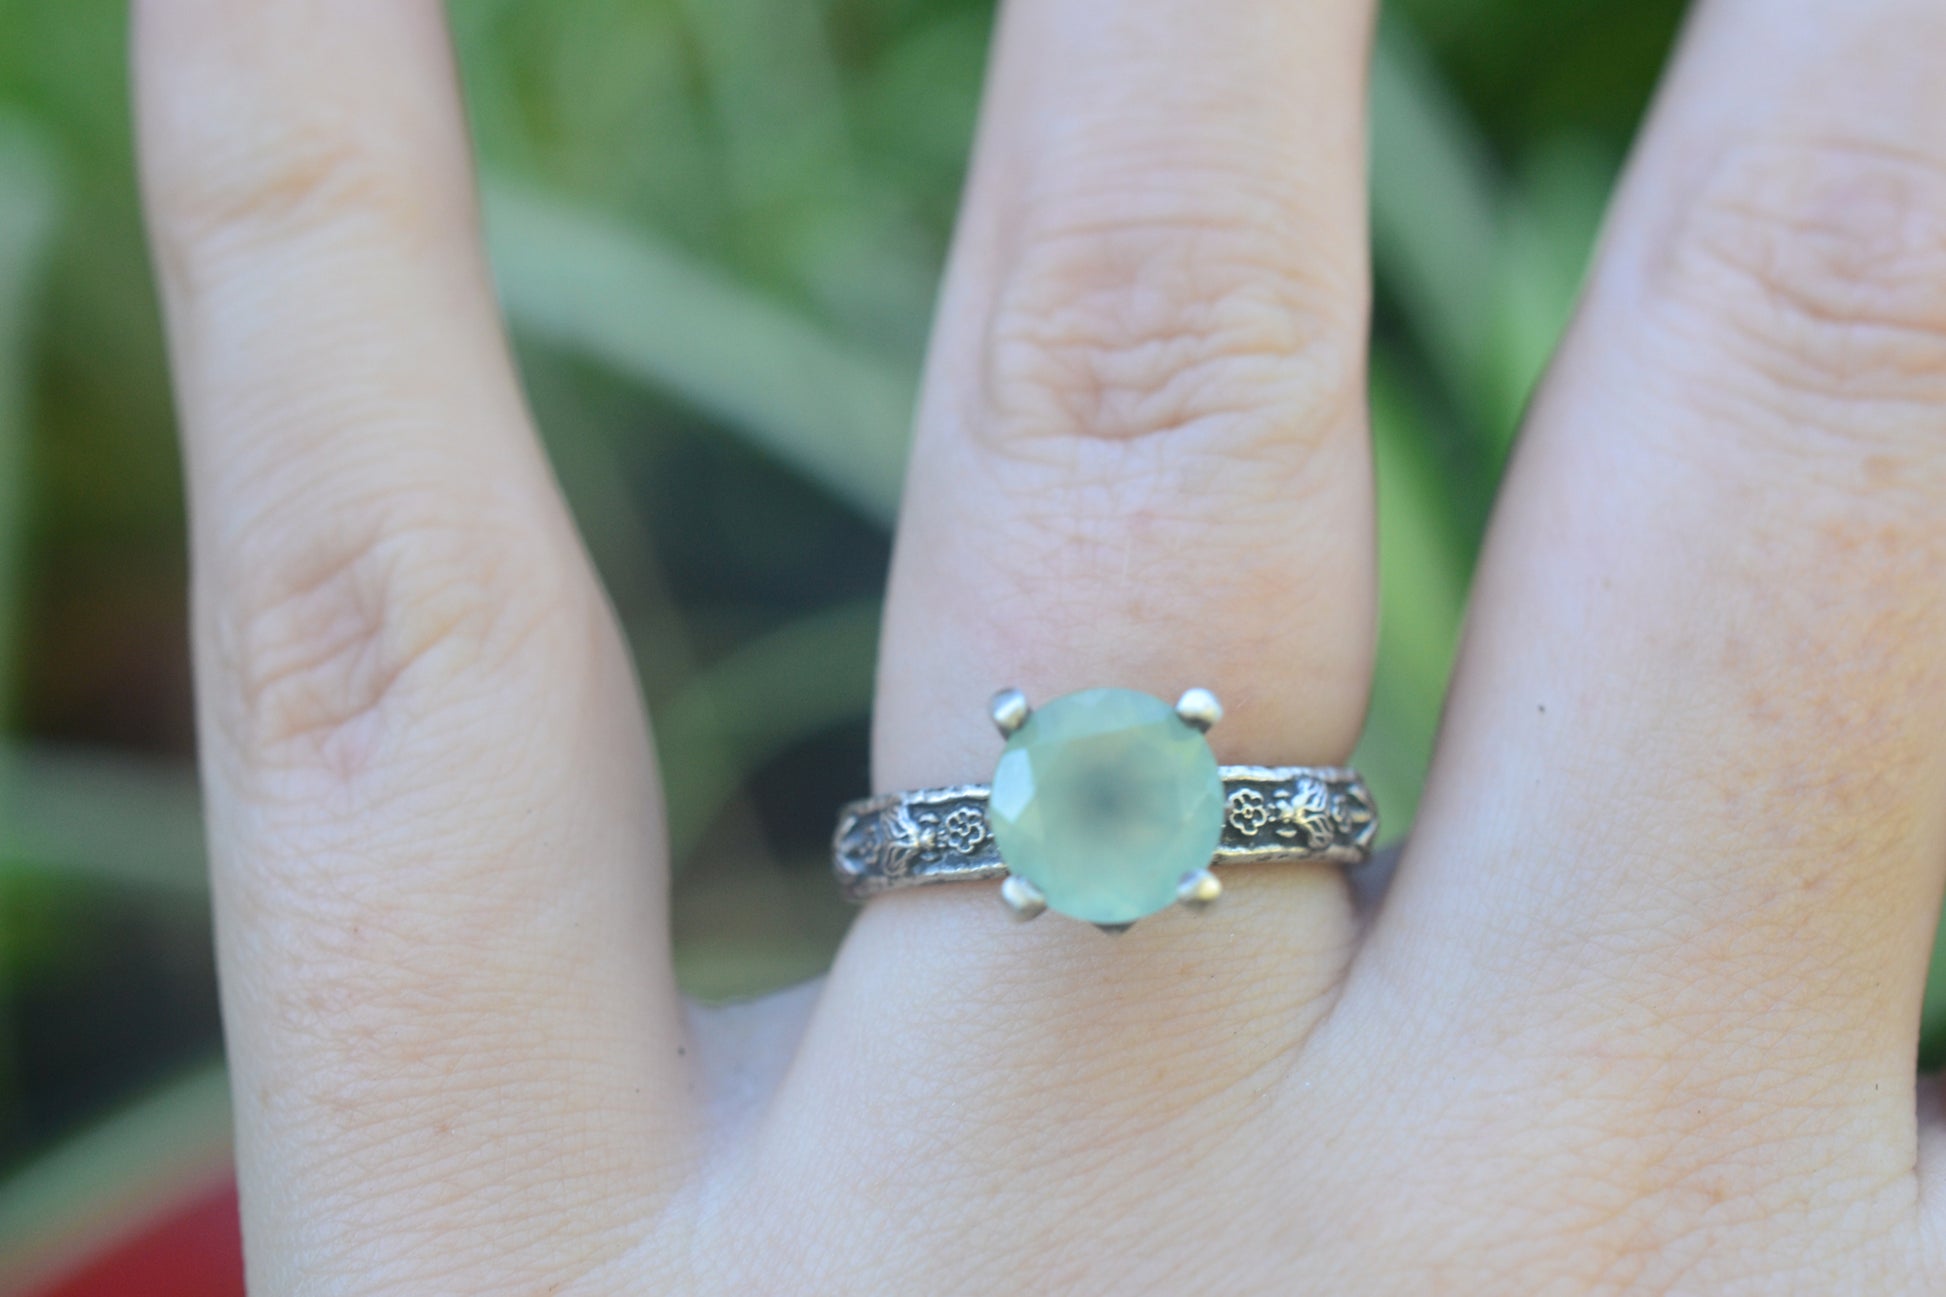 8mm Prehnite Crystal Ring With Oxidised Band